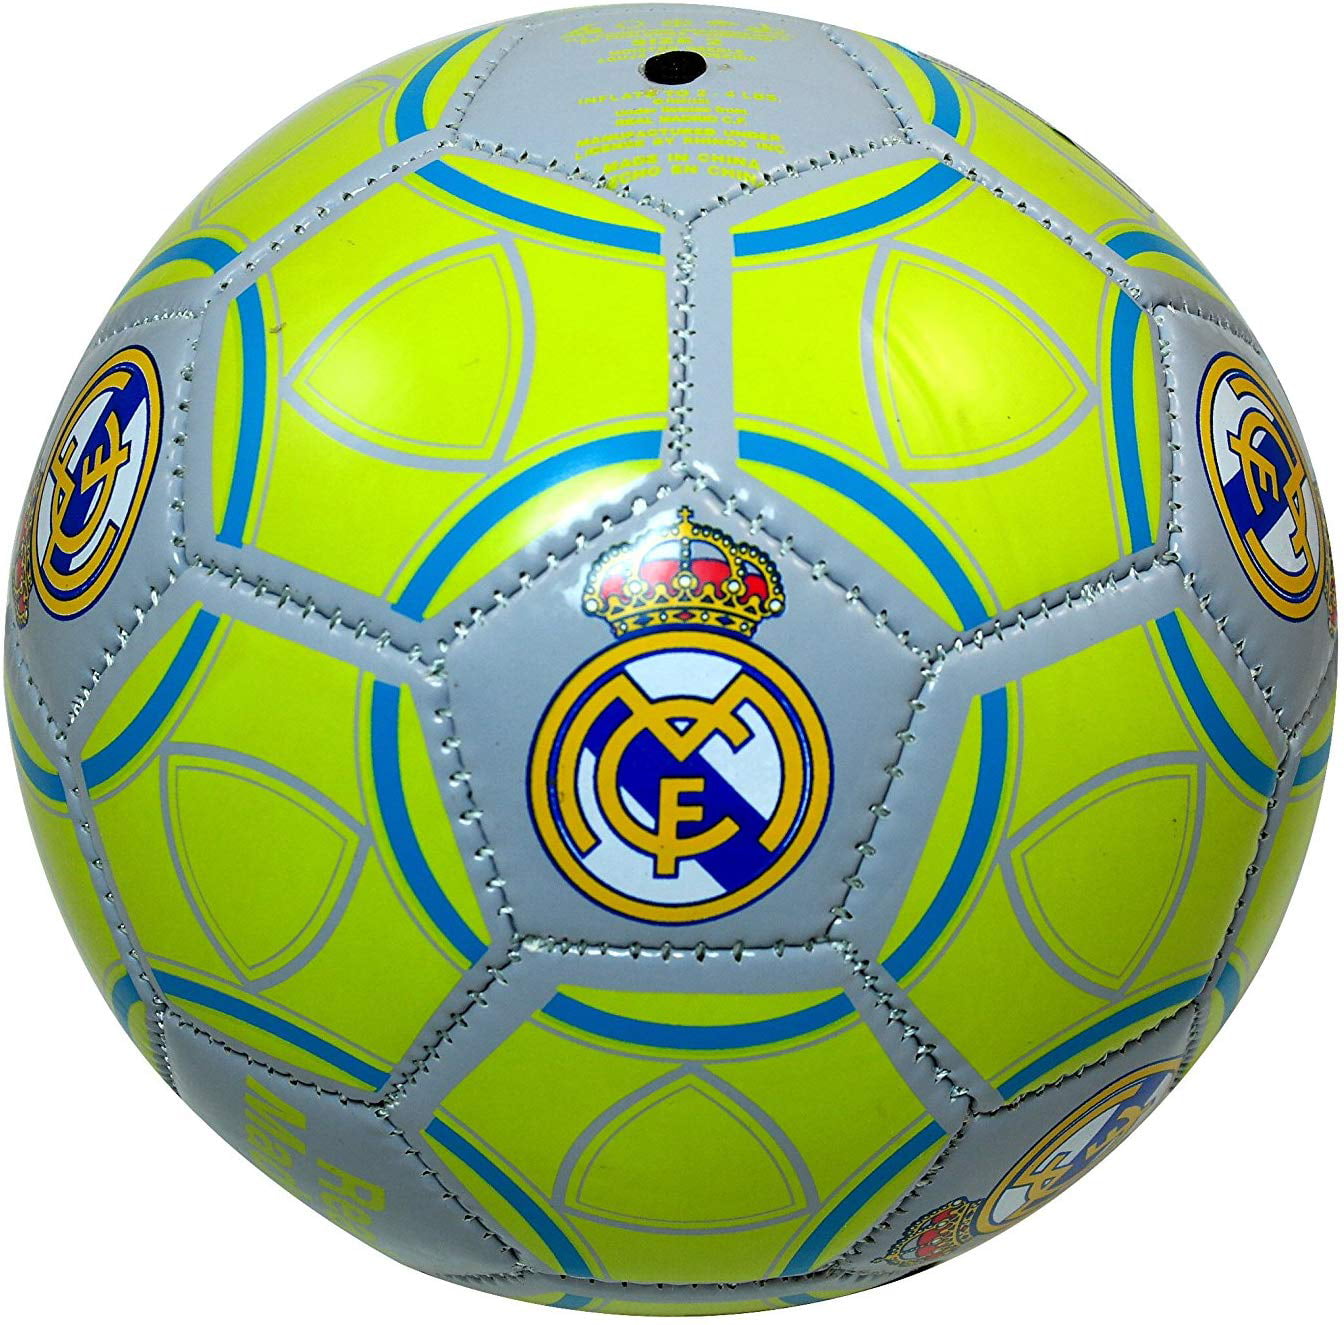 RHINOXGROUP Authentic Official Licensed Soccer Ball 